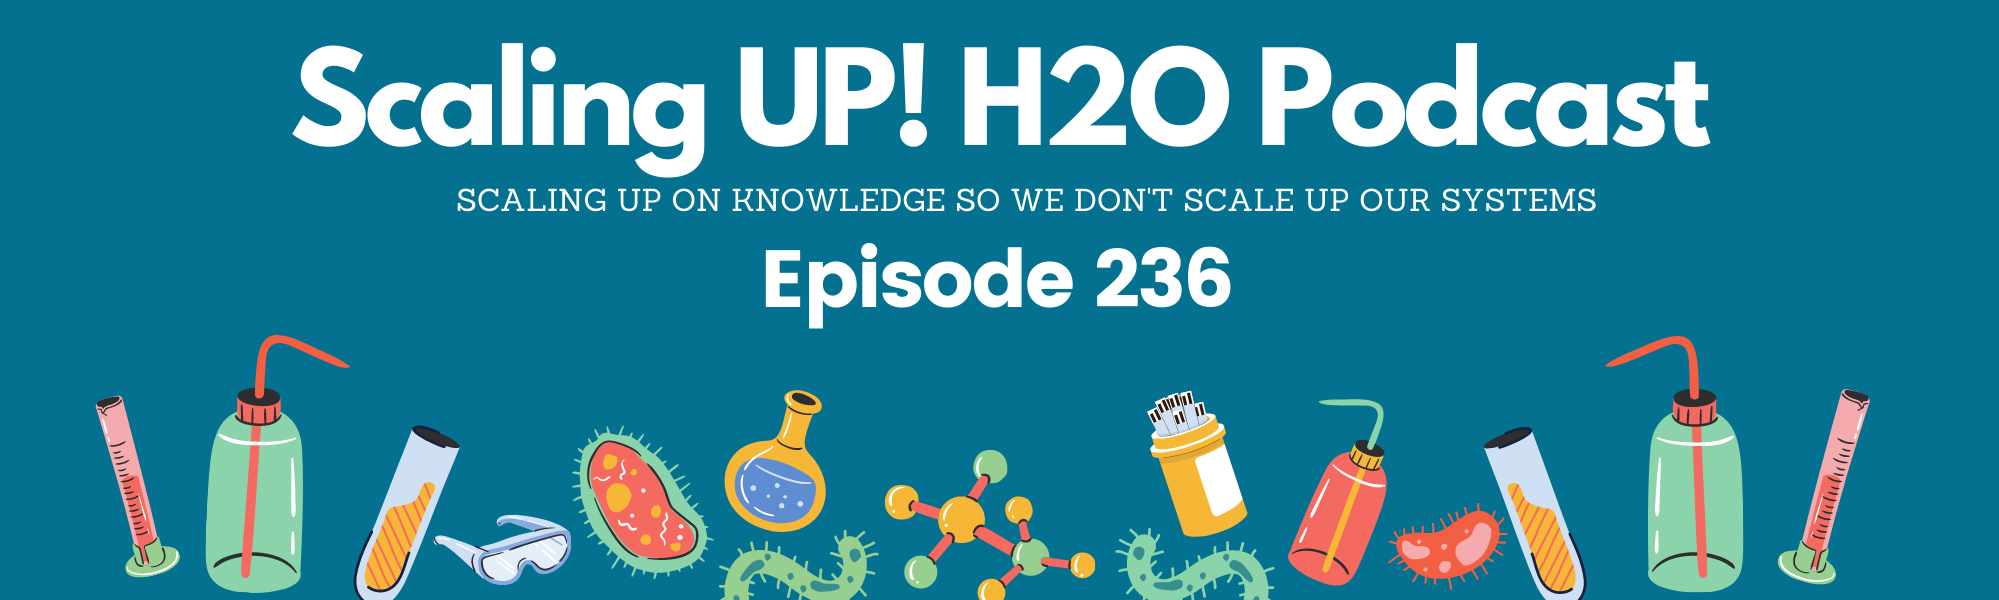 236 The One Where We Talk About Waters Treaters Changing The World - Scaling UP! H2O